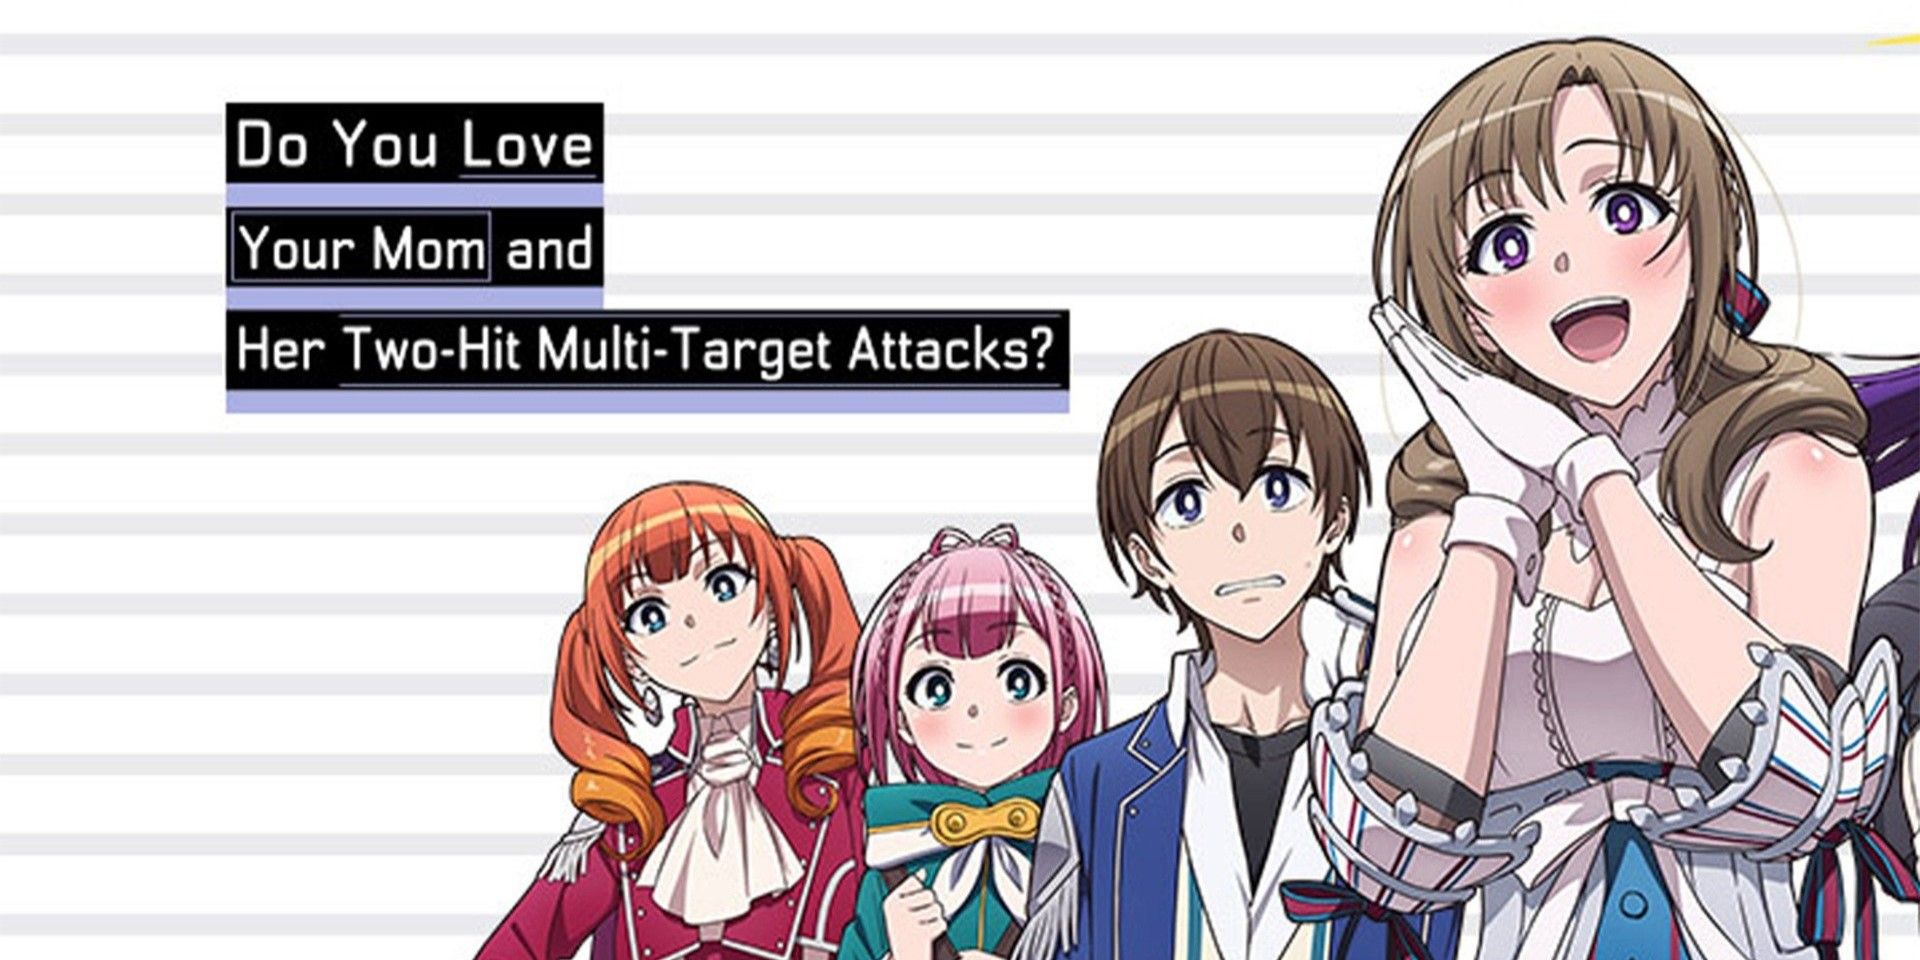 Do You Love Your Mom and Her Two-Hit Multi-Target Attacks official cover art